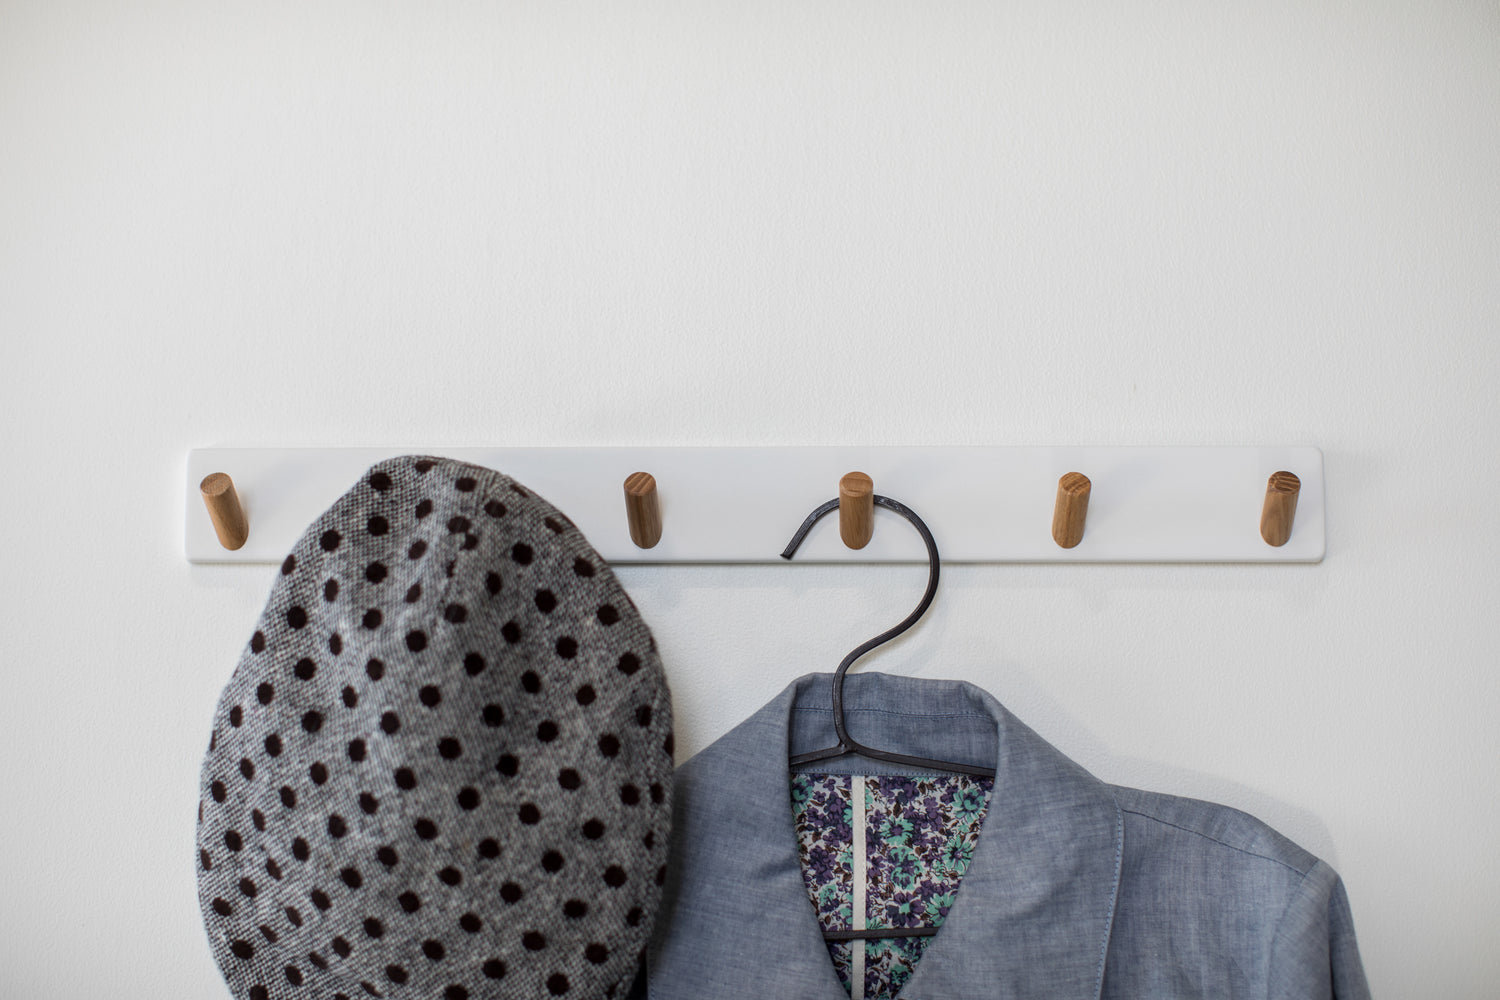 View 4 - Front view of white Wall-Mounted Coat Hanger holding hat and jacket by Yamazaki Home.